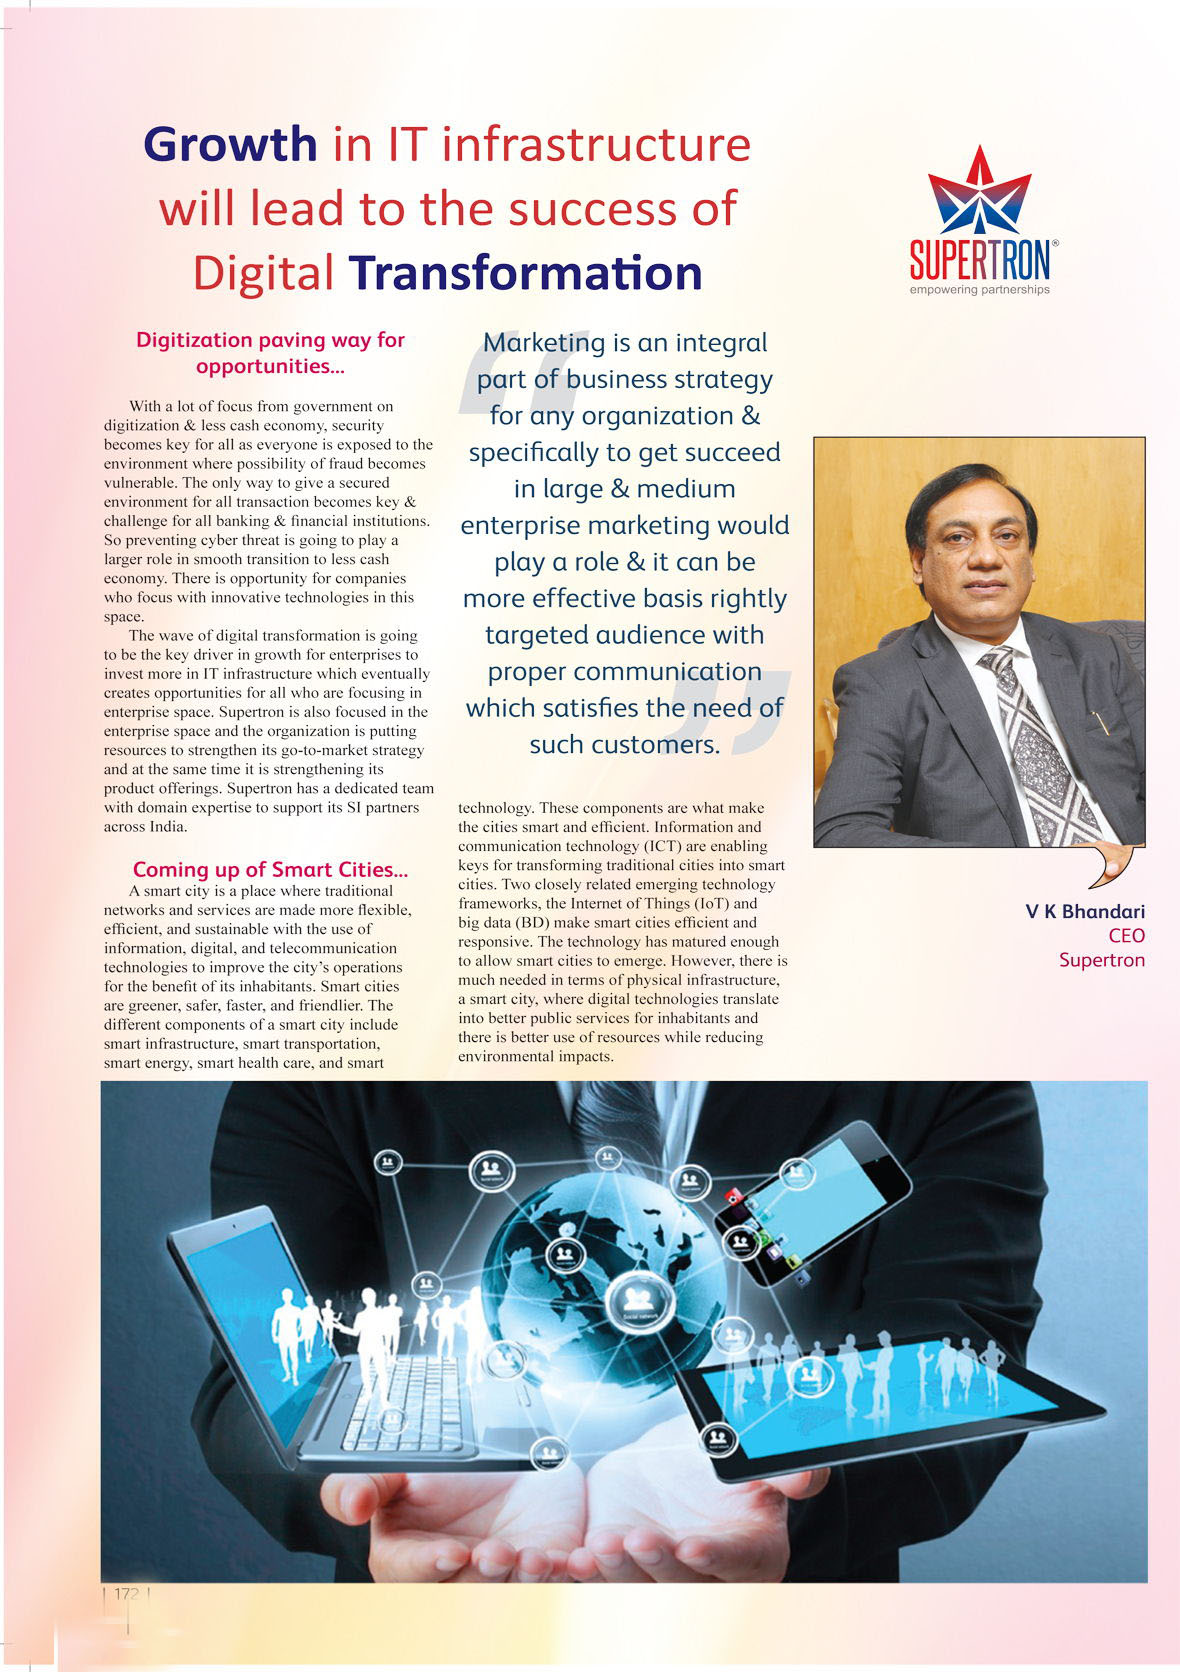 Supertron  : Growth in IT infrastructure will lead to the success of Digital Transformation